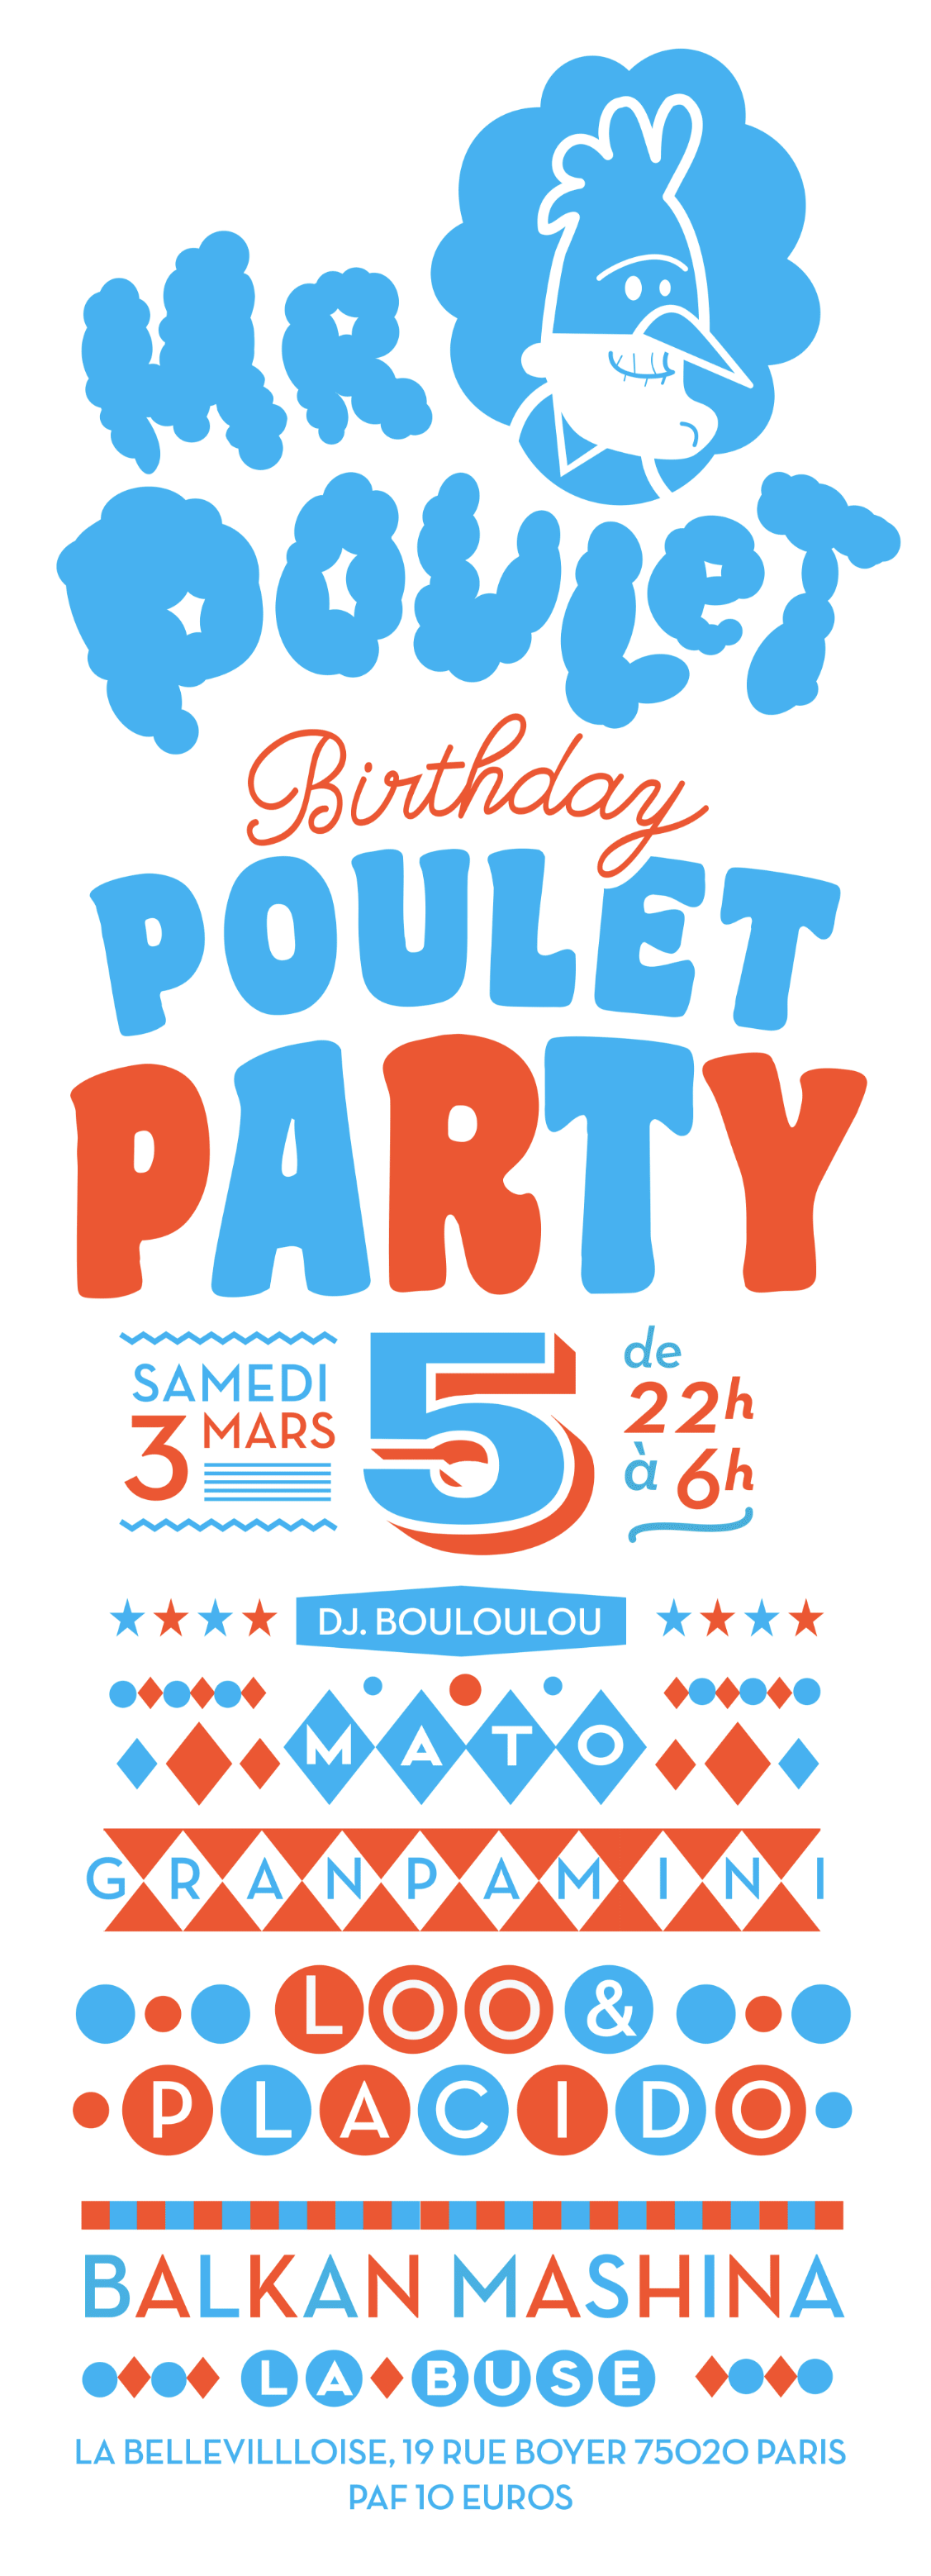 Birthday-Poulet-Party.png